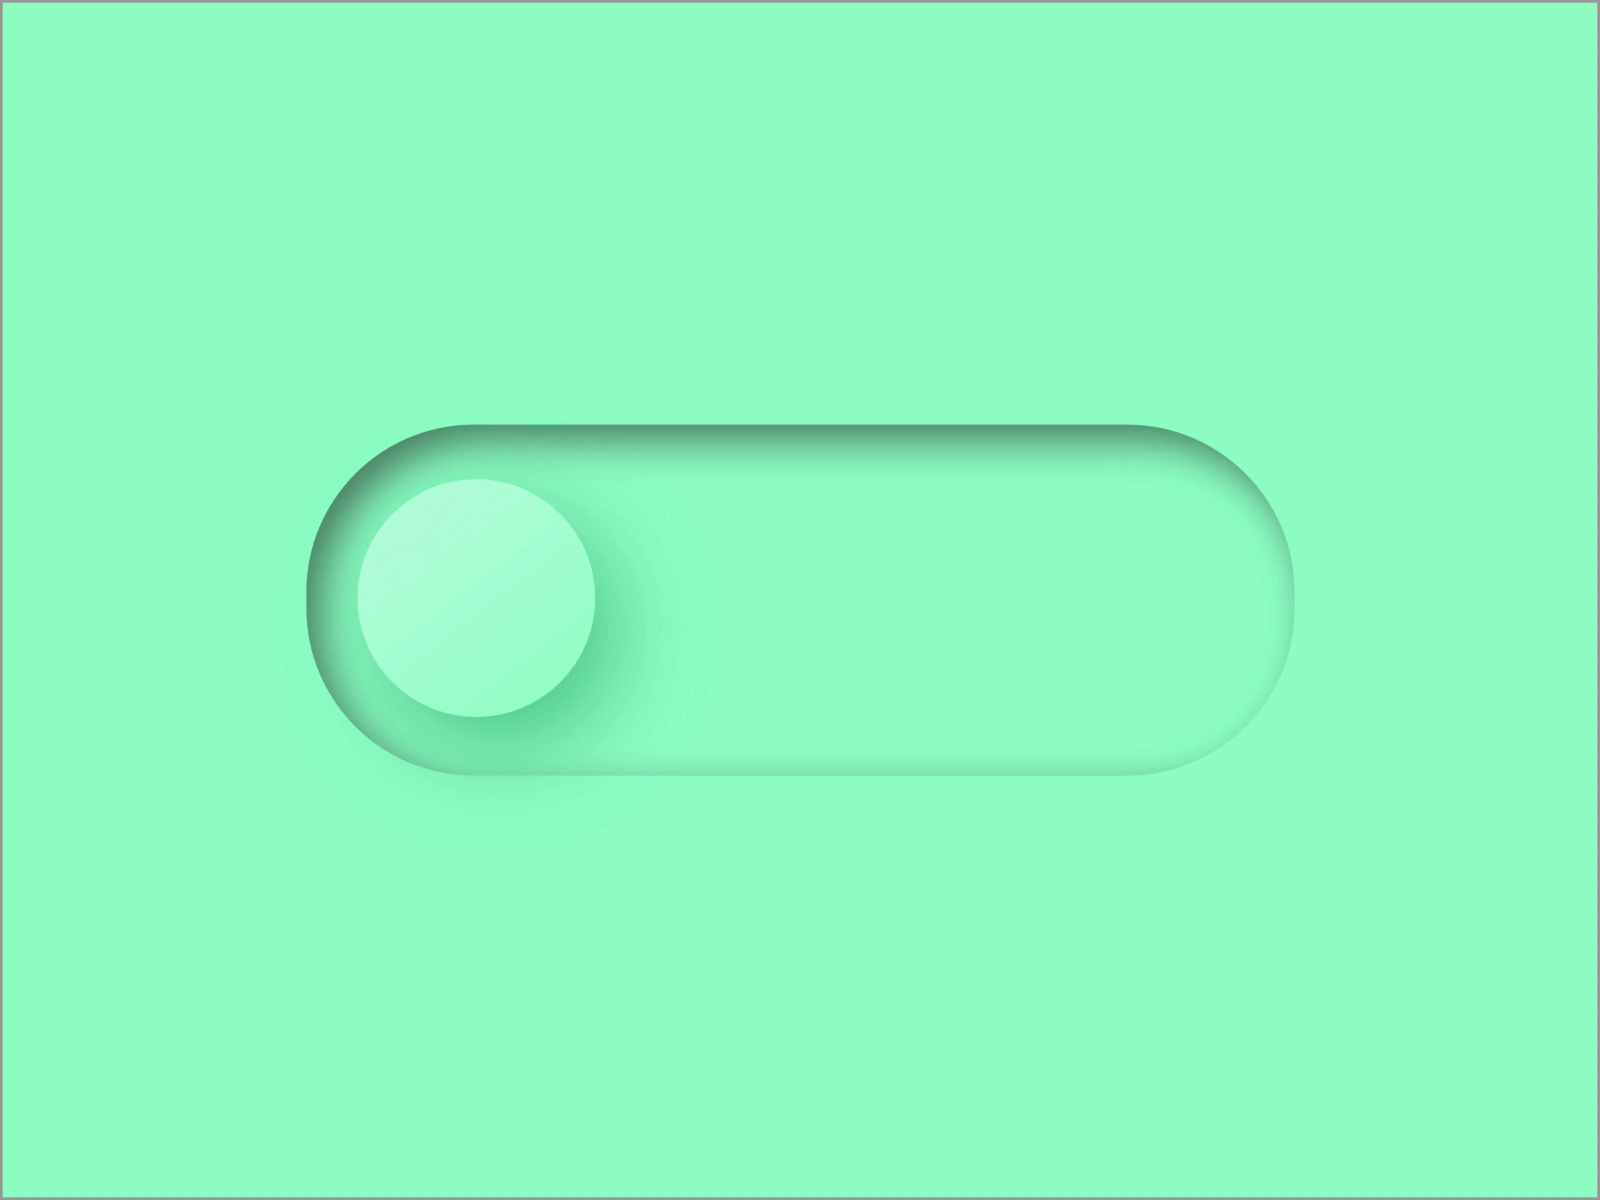 On Off Switch daily ui dailyui neomorphic neomorphism onoff switch onoffswitch switch toggle button toggle switch